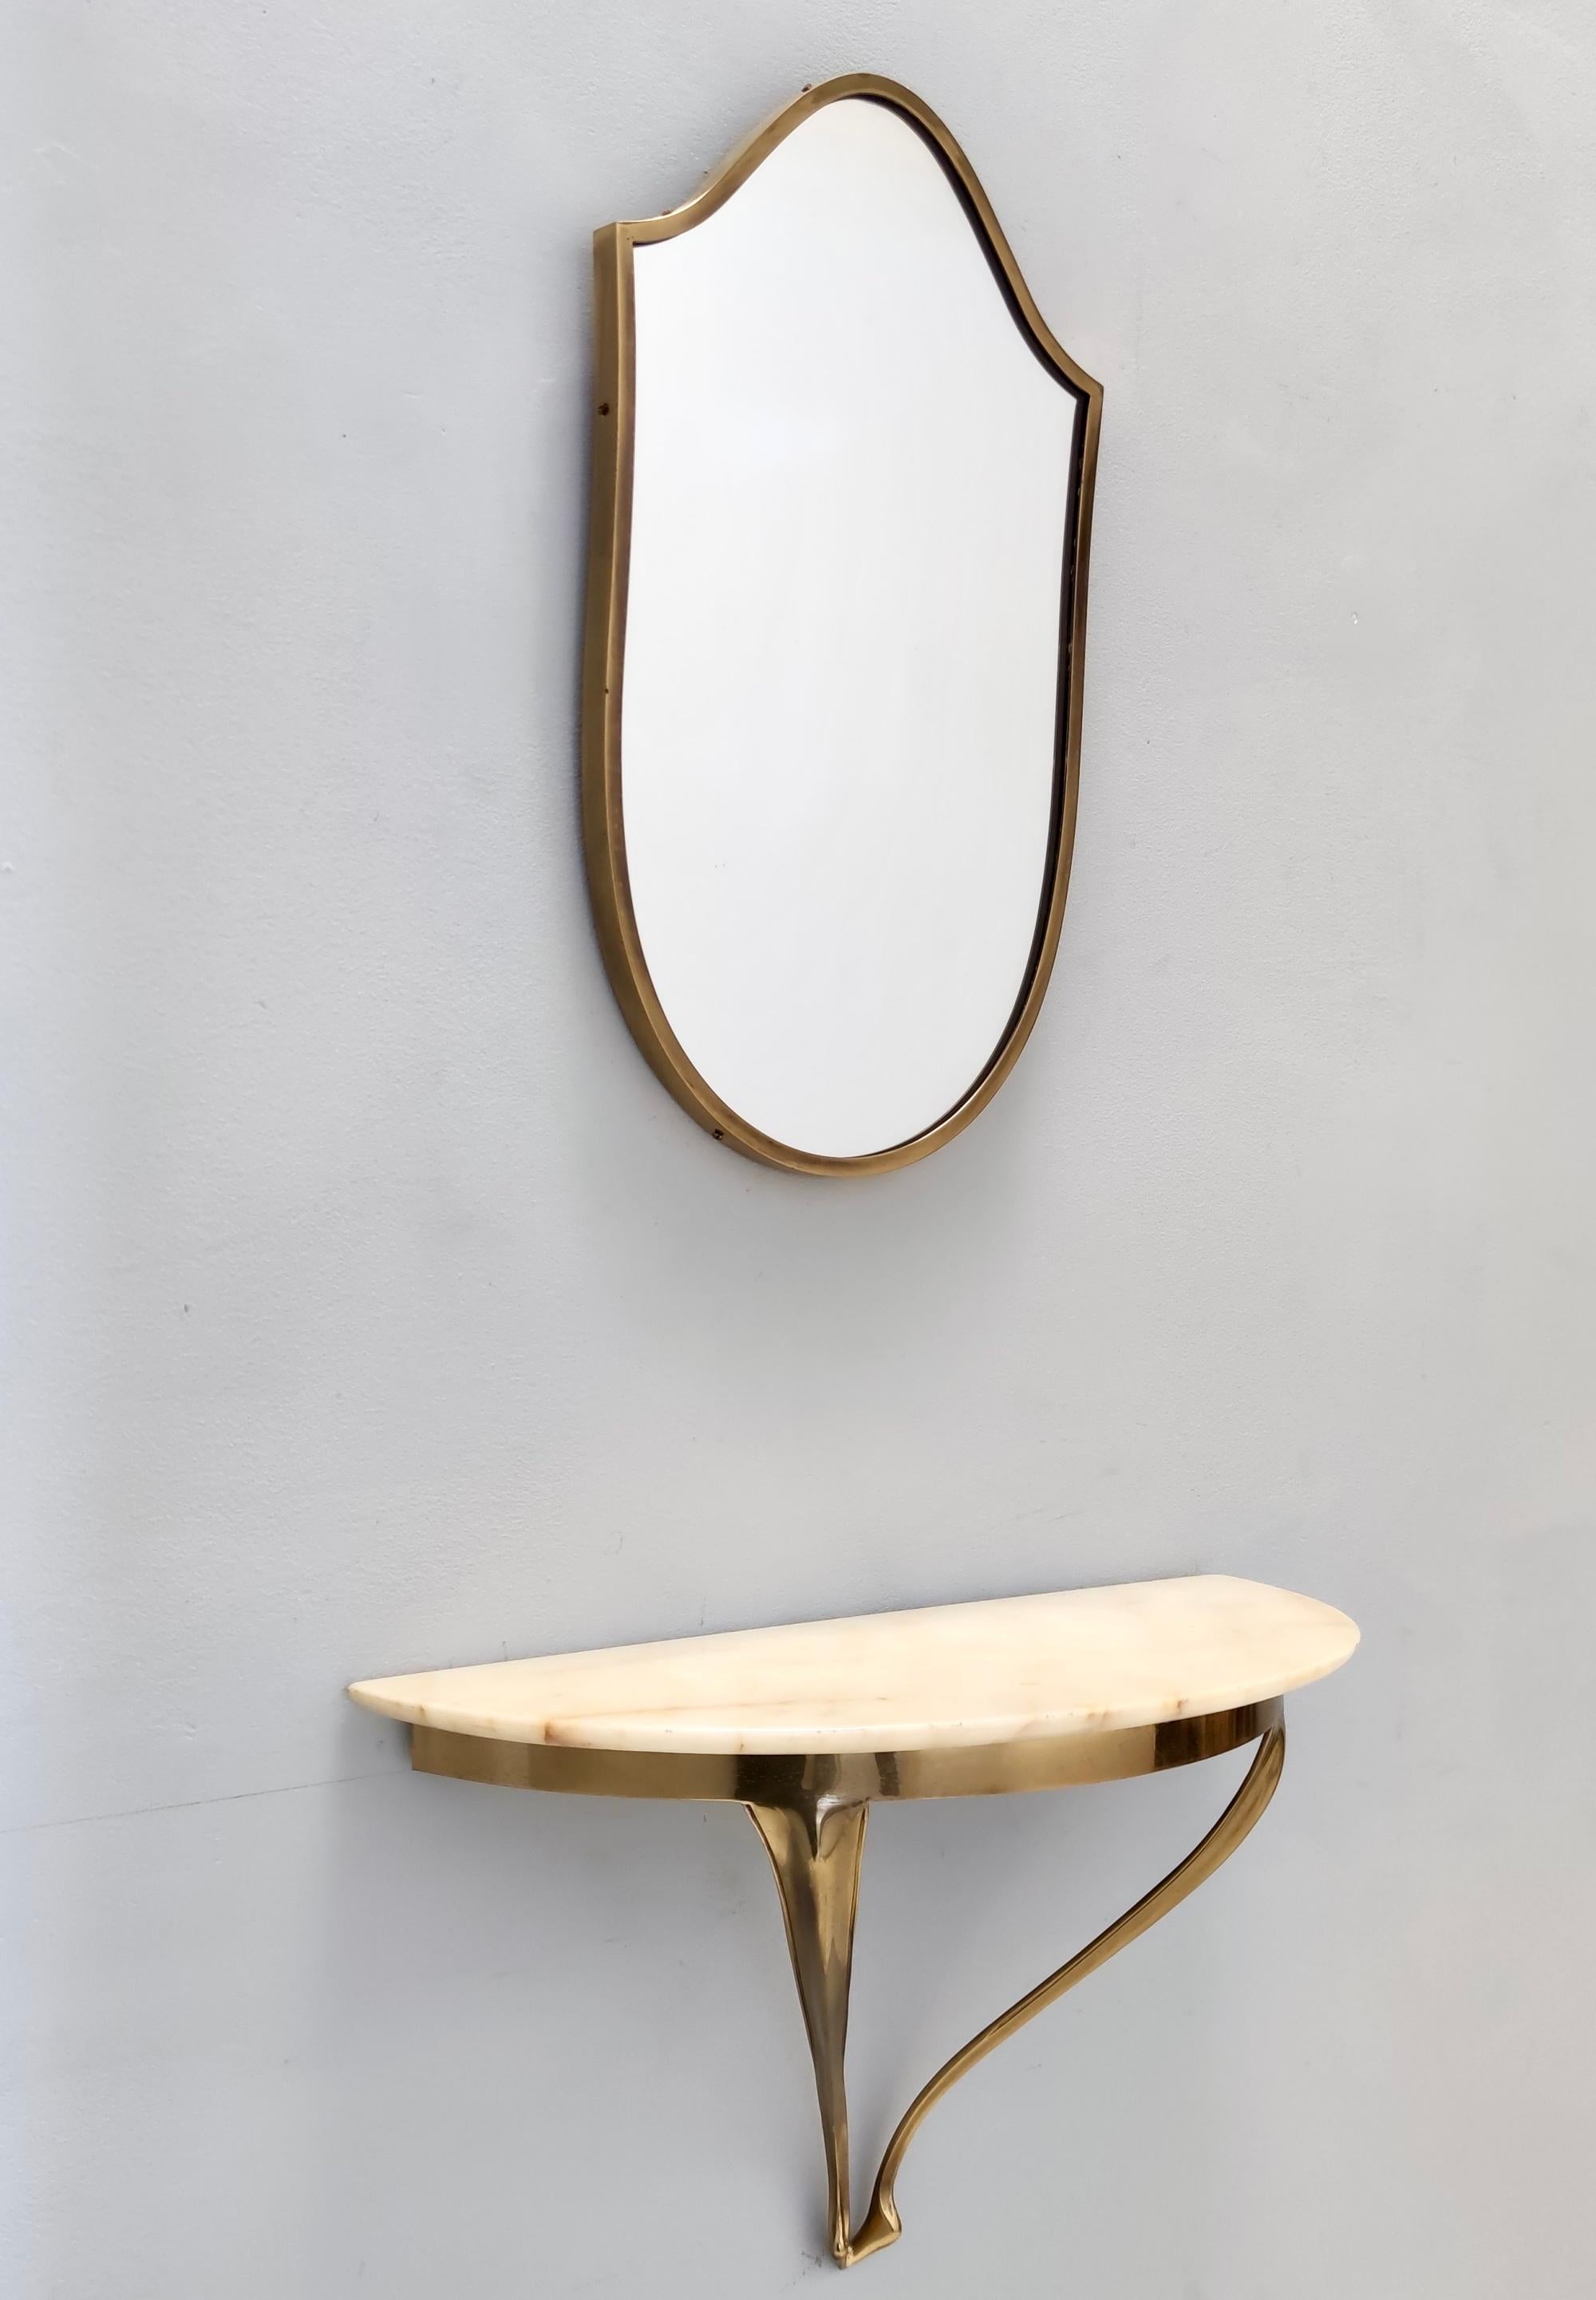 Italian Vintage Shield Wall Mirror and a Wall-Mounted Console with a Marble Top, Italy